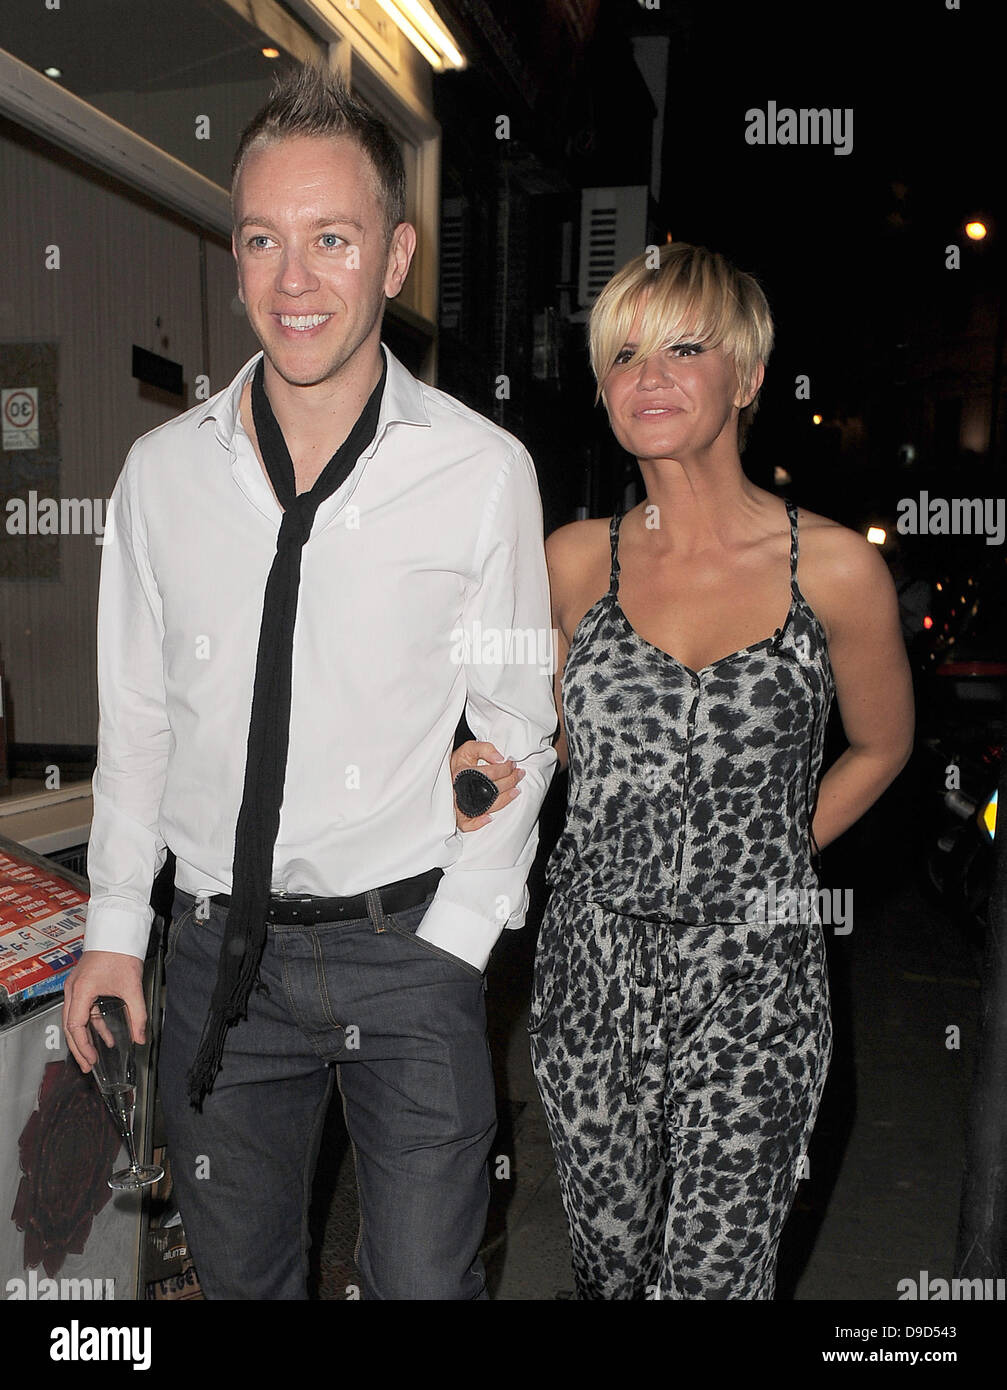 Kerry Katona and Daniel Whiston arriving at a private party in Chelsea. London, England - 24.03.11 Stock Photo